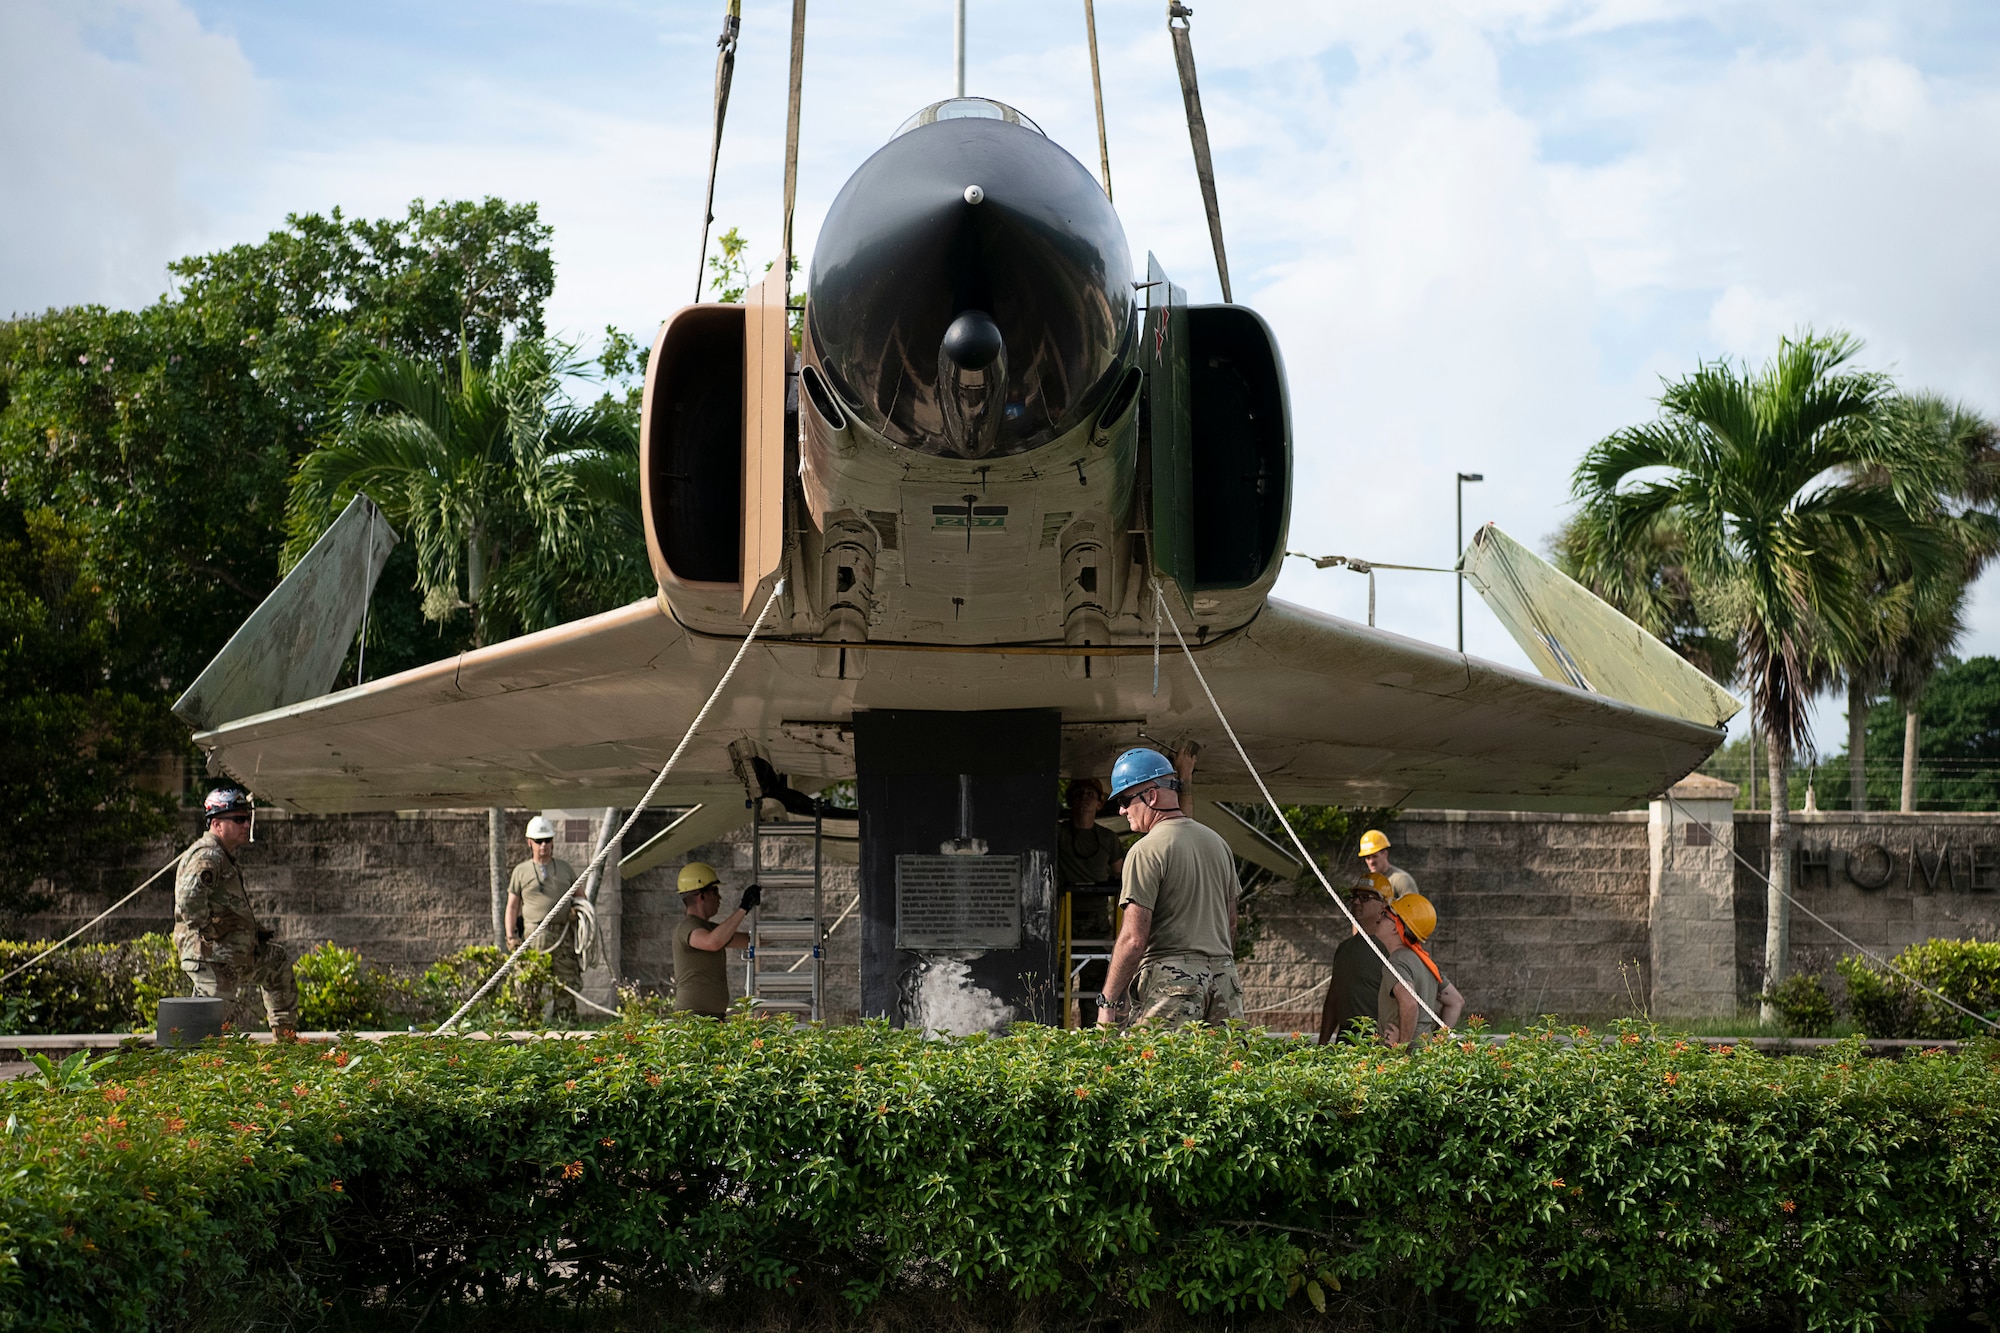 482nd Aircraft Maintenance Squadron personnel prior to load F-4D fighter jet, serial number 66-0267, onto a trailer prior to being transported to the aircraft corrosion control facility at Homestead Air Reserve Base, Fla., on Oct. 28, 2021. The jet is part of a static display at the entrance to HARB. (U.S. Air Force photo by Tim Norton)